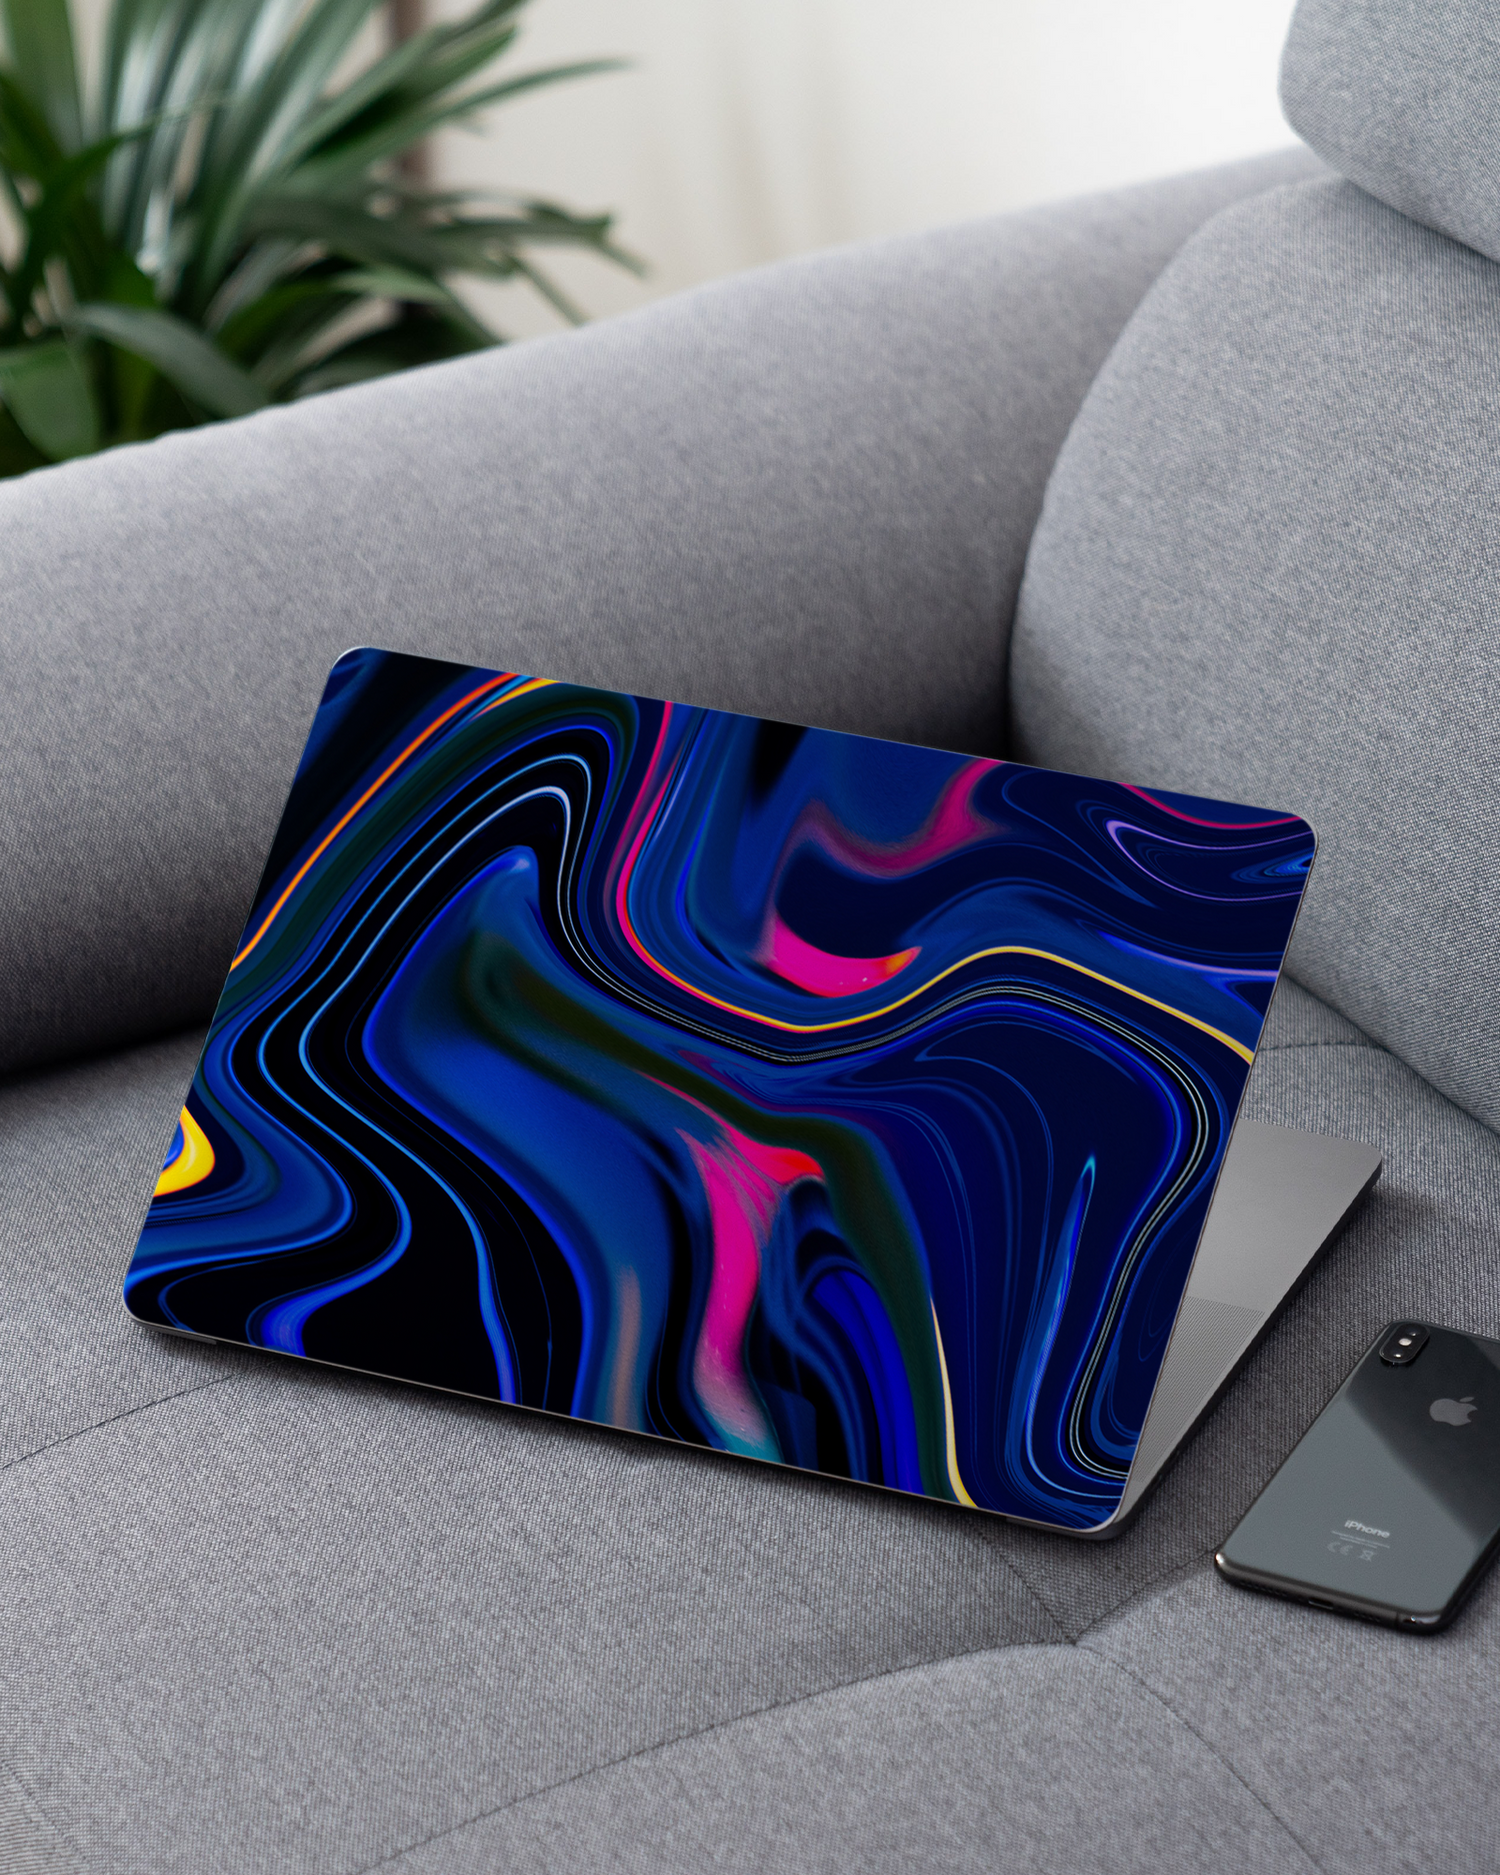 Space Swirl Laptop Skin for 13 inch Apple MacBooks on a couch